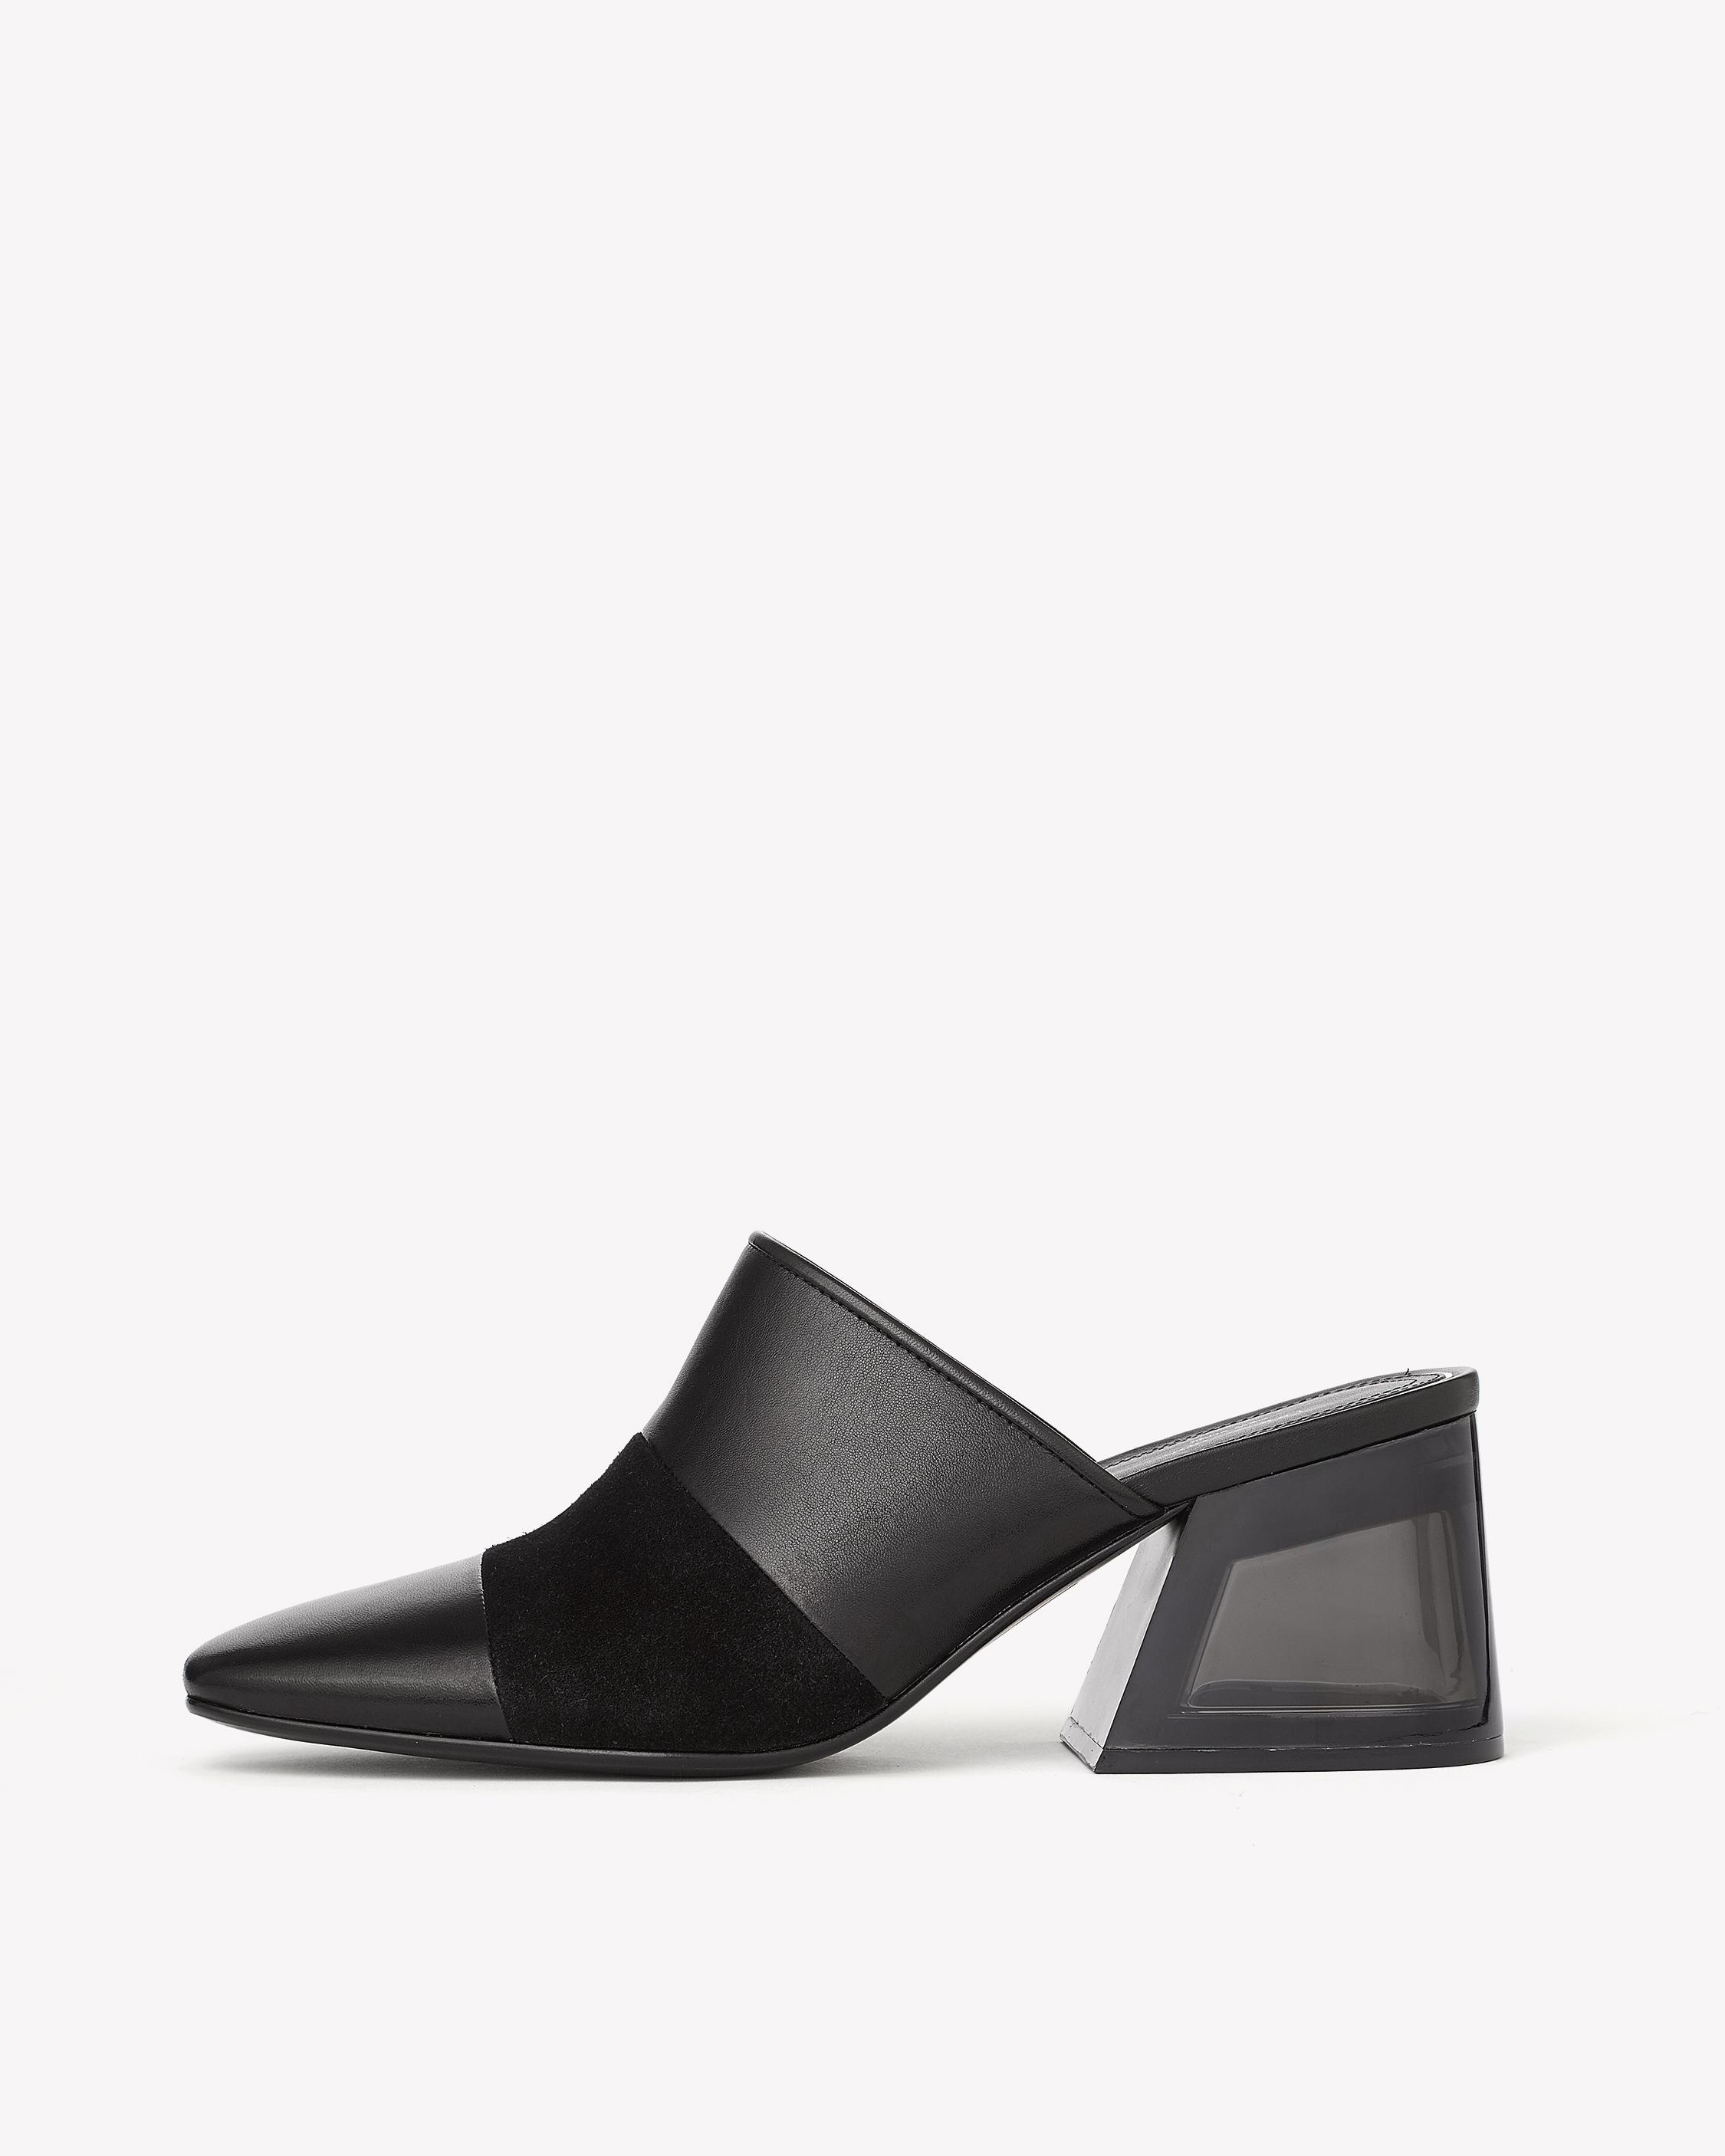 Womens Shoes: Boots to Loafers to Sandals with an Urban Edge | rag & bone